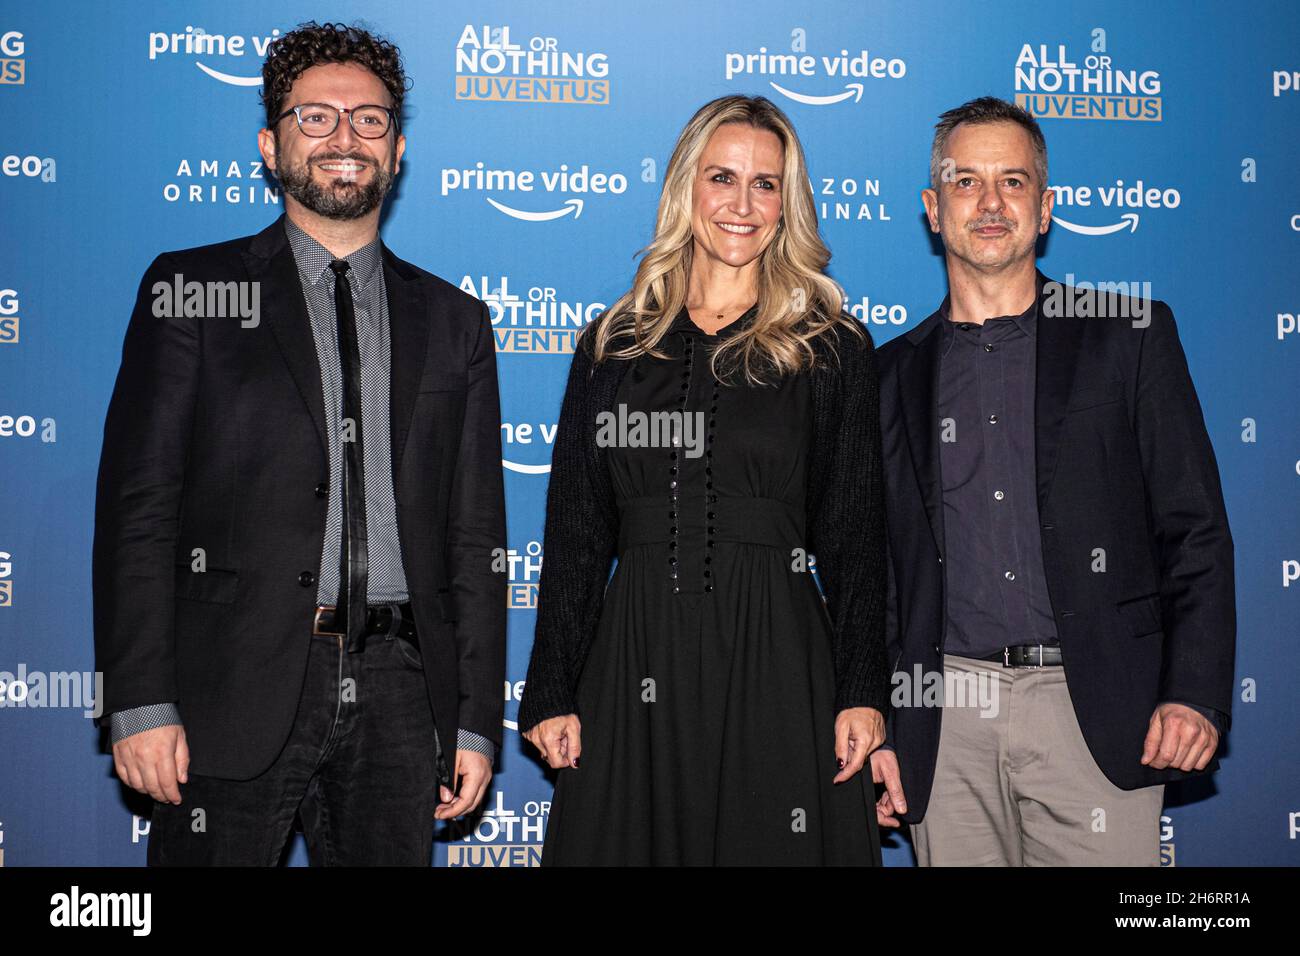 Turin, Italy. 17 November 2021. Dante Sollazzo, Nicole Morganti and Lorenzo Anastasio pose during the photo call of the new Amazon Prime Video show 'All or Nothing: Juventus' premiere. Credit: Nicolò Campo/Alamy Live News Stock Photo